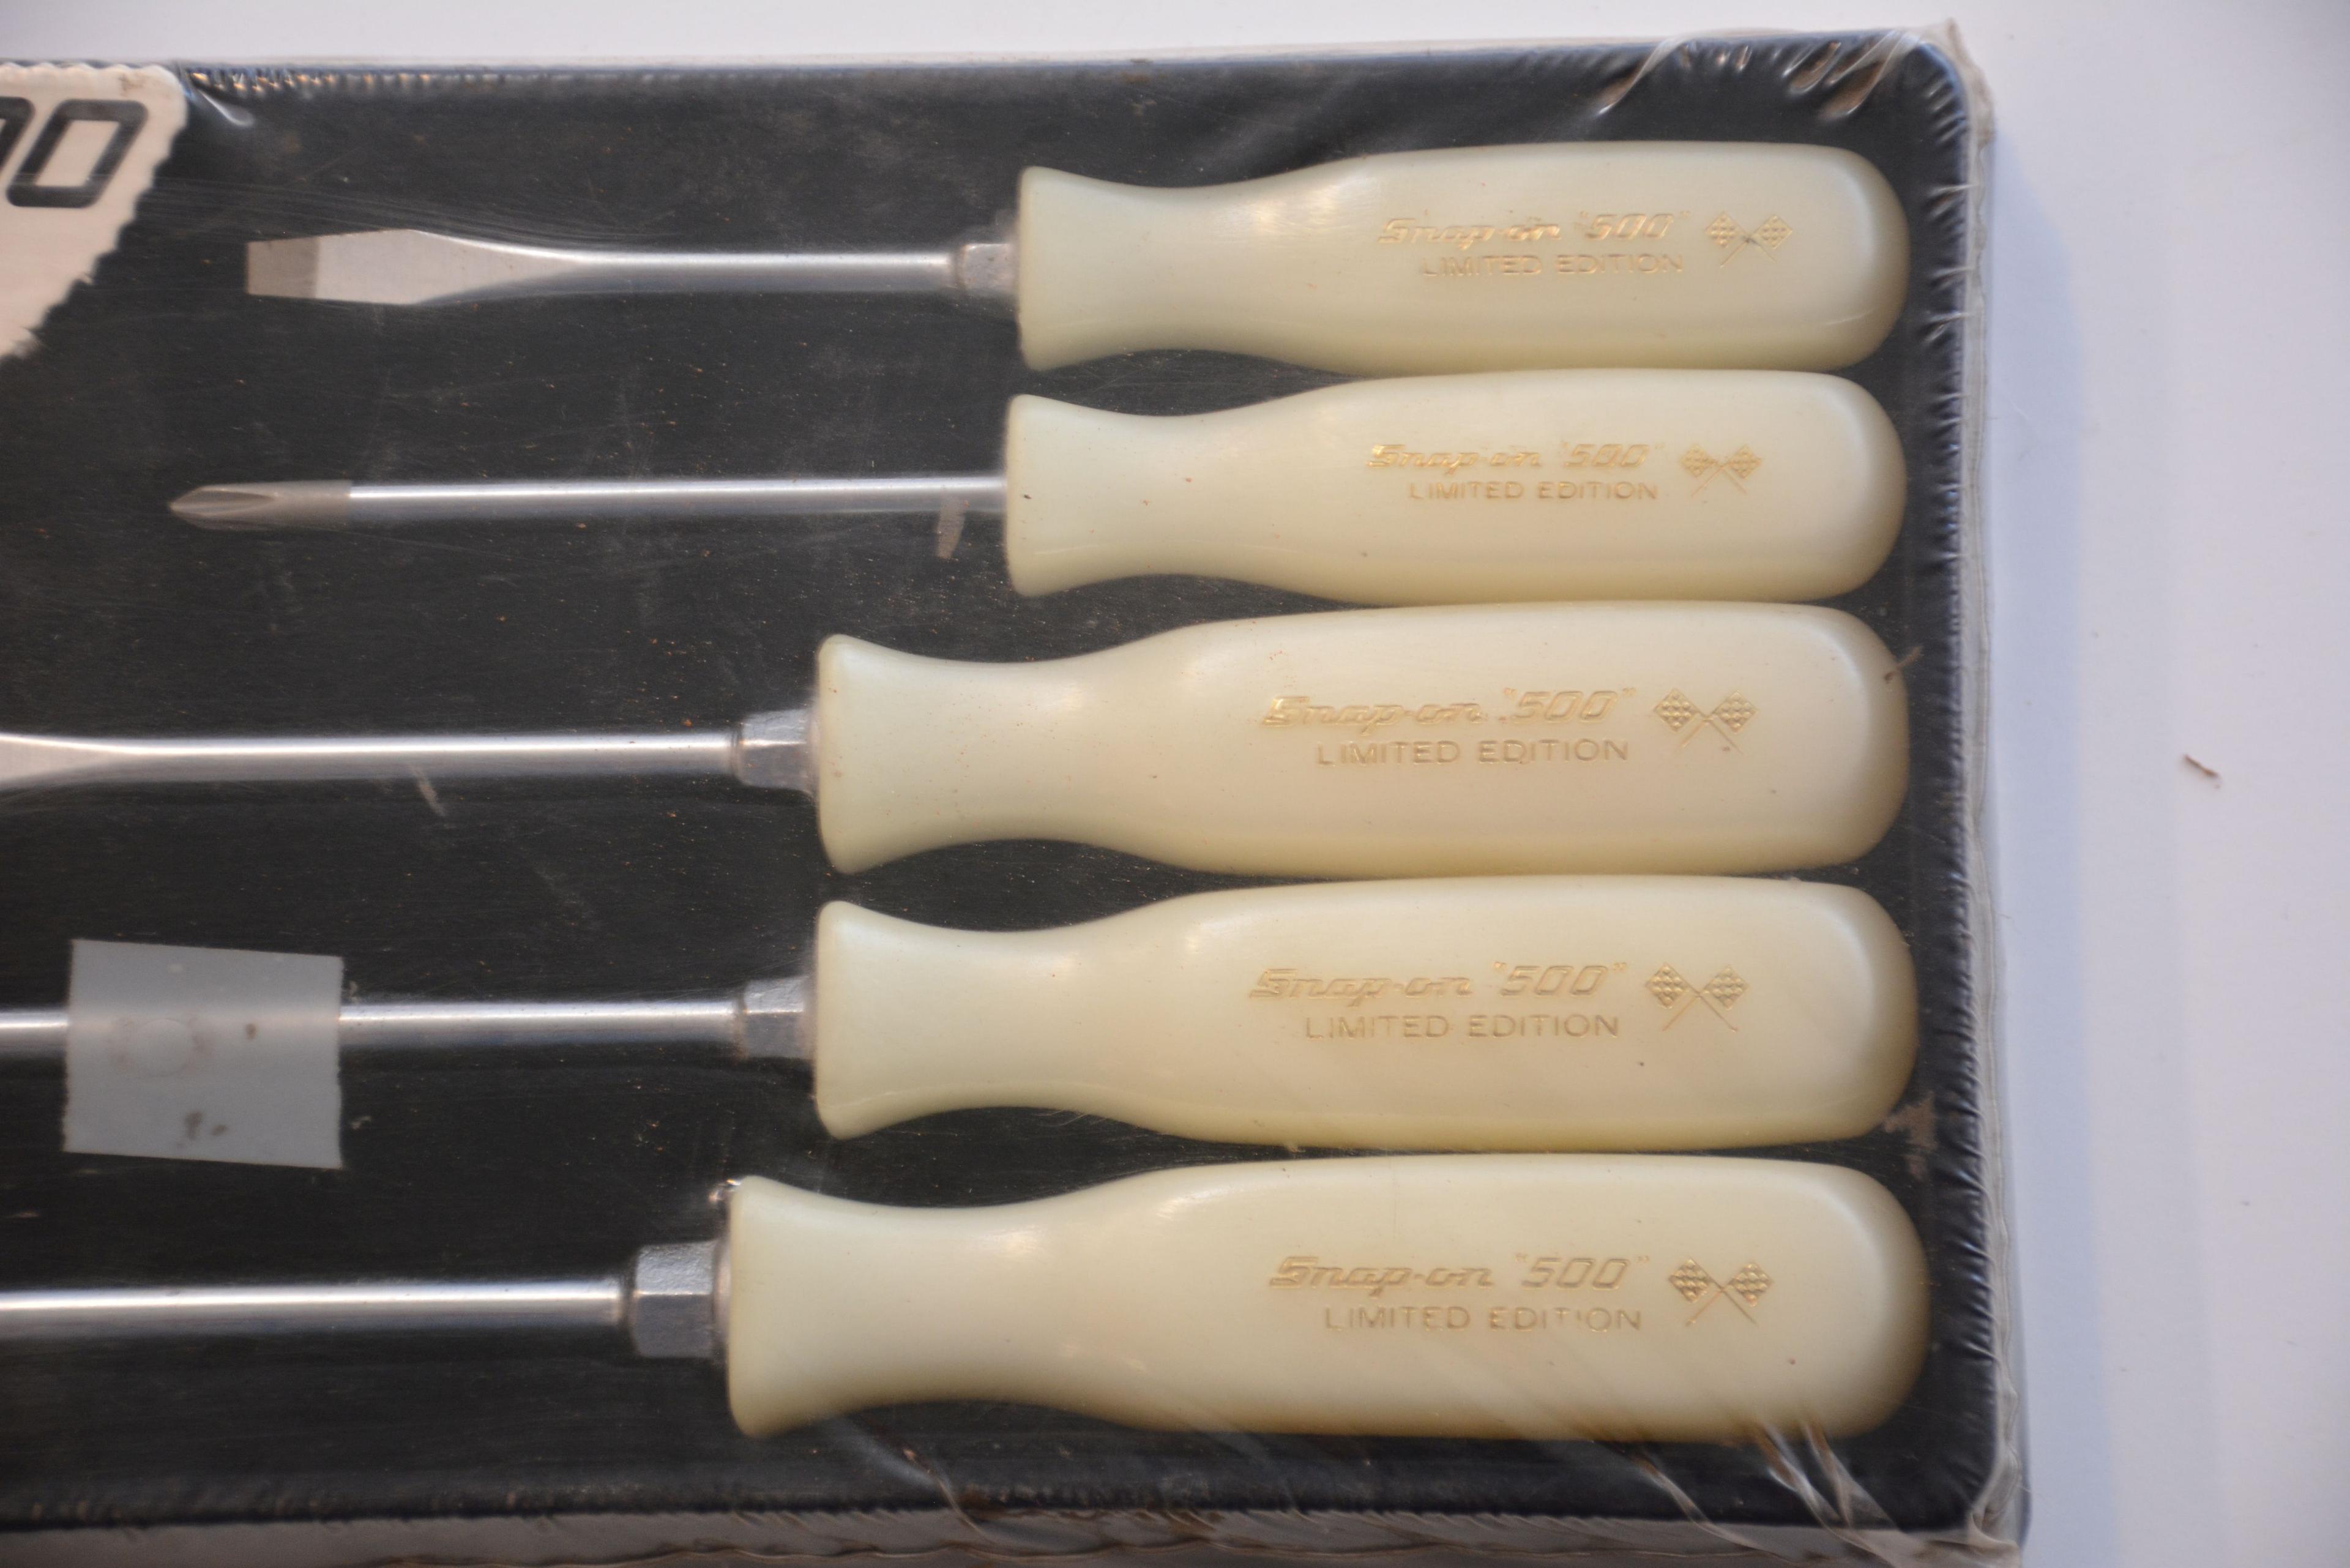 Snap-on Screw Driver Set, Commemorative Indianapolis 500